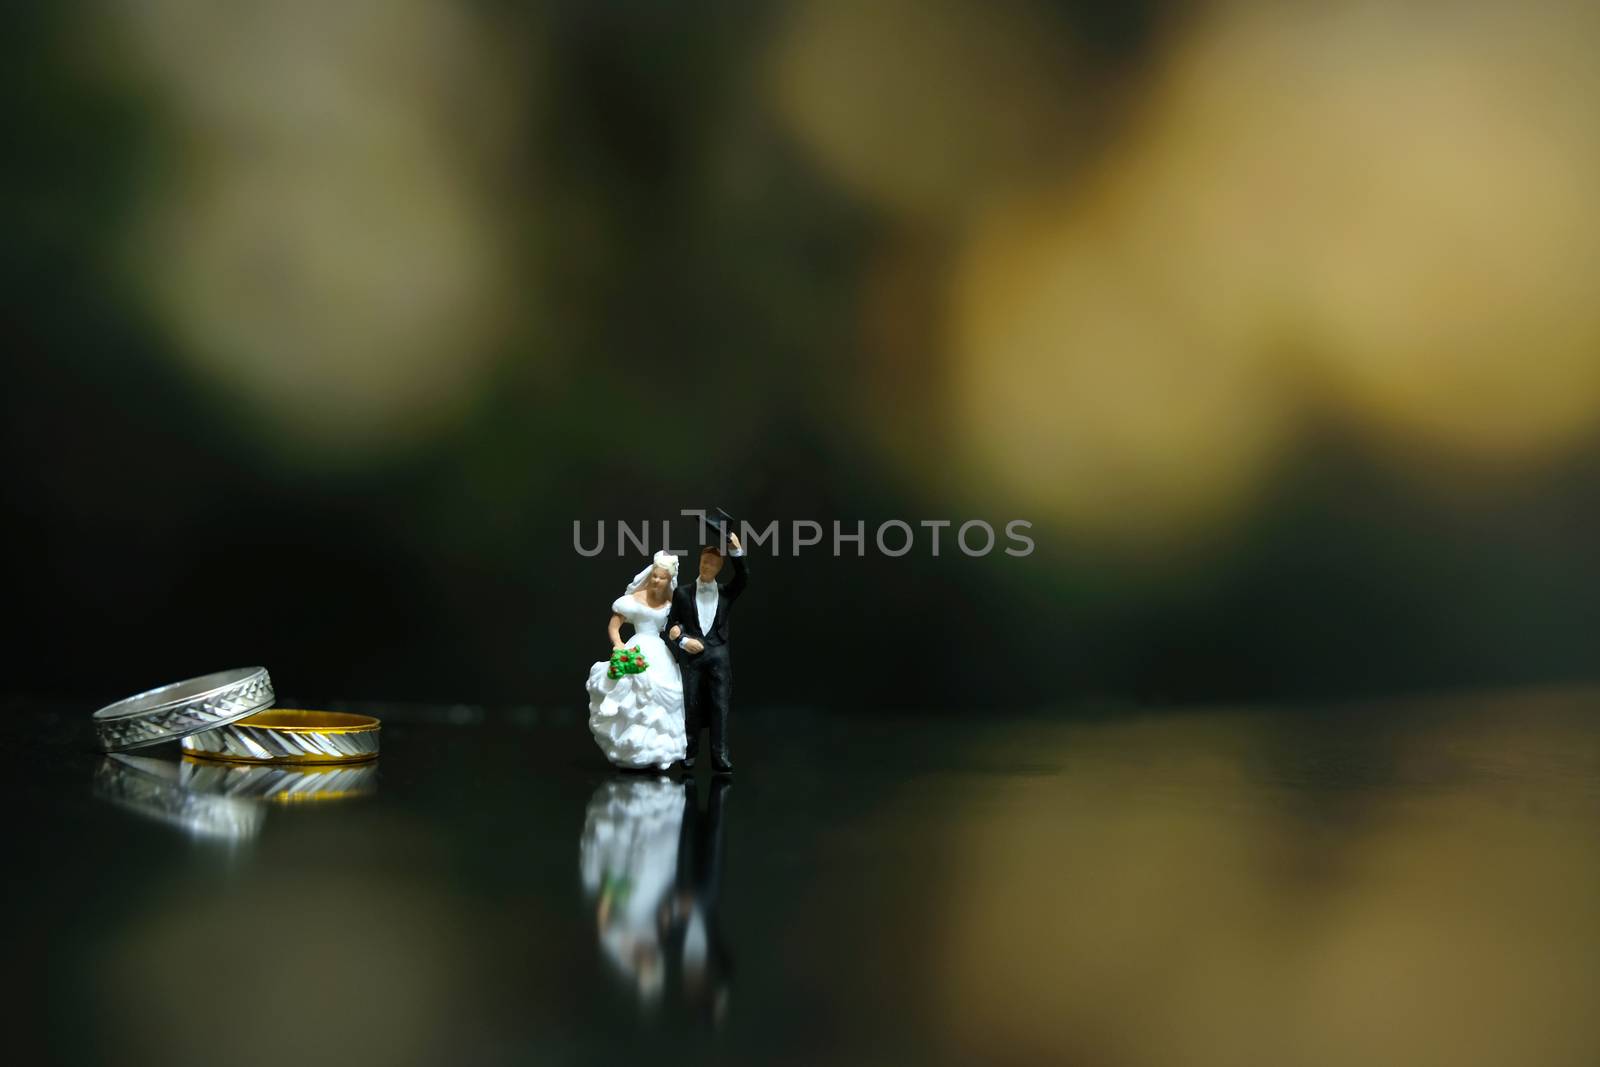 Miniature wedding concept - bride and groom walking on a shiny floor with couple ring